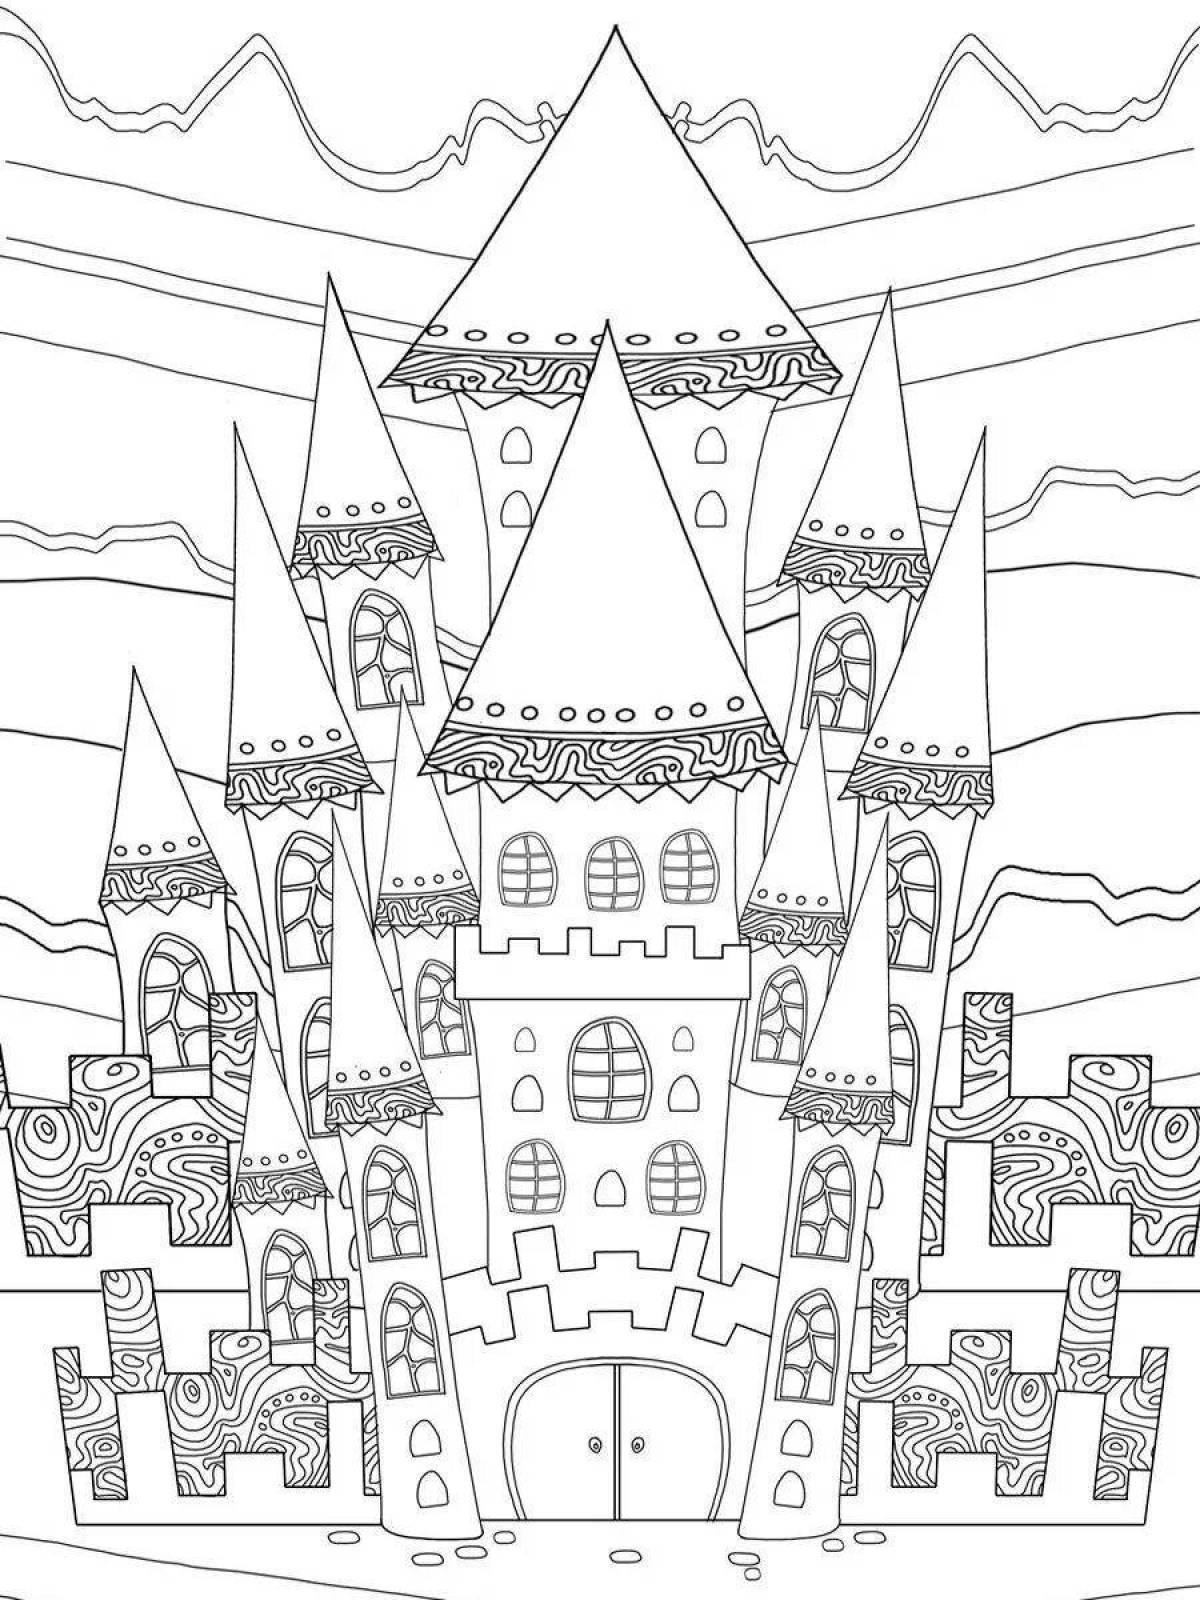 Dazzling castle coloring book for children 4-5 years old